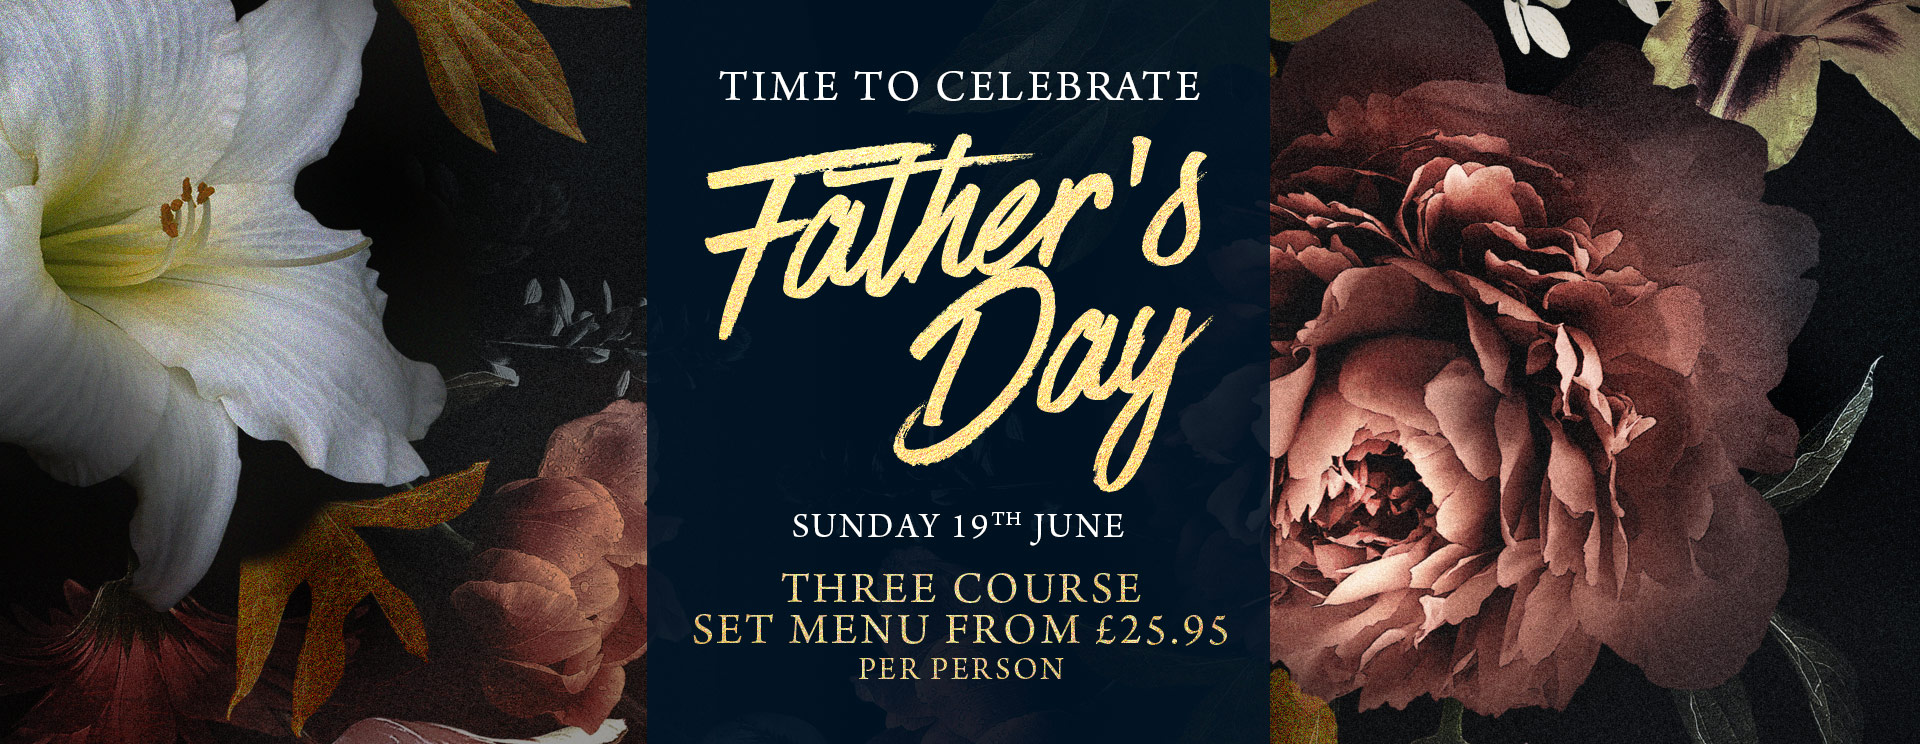 Fathers Day at The Horse & Groom